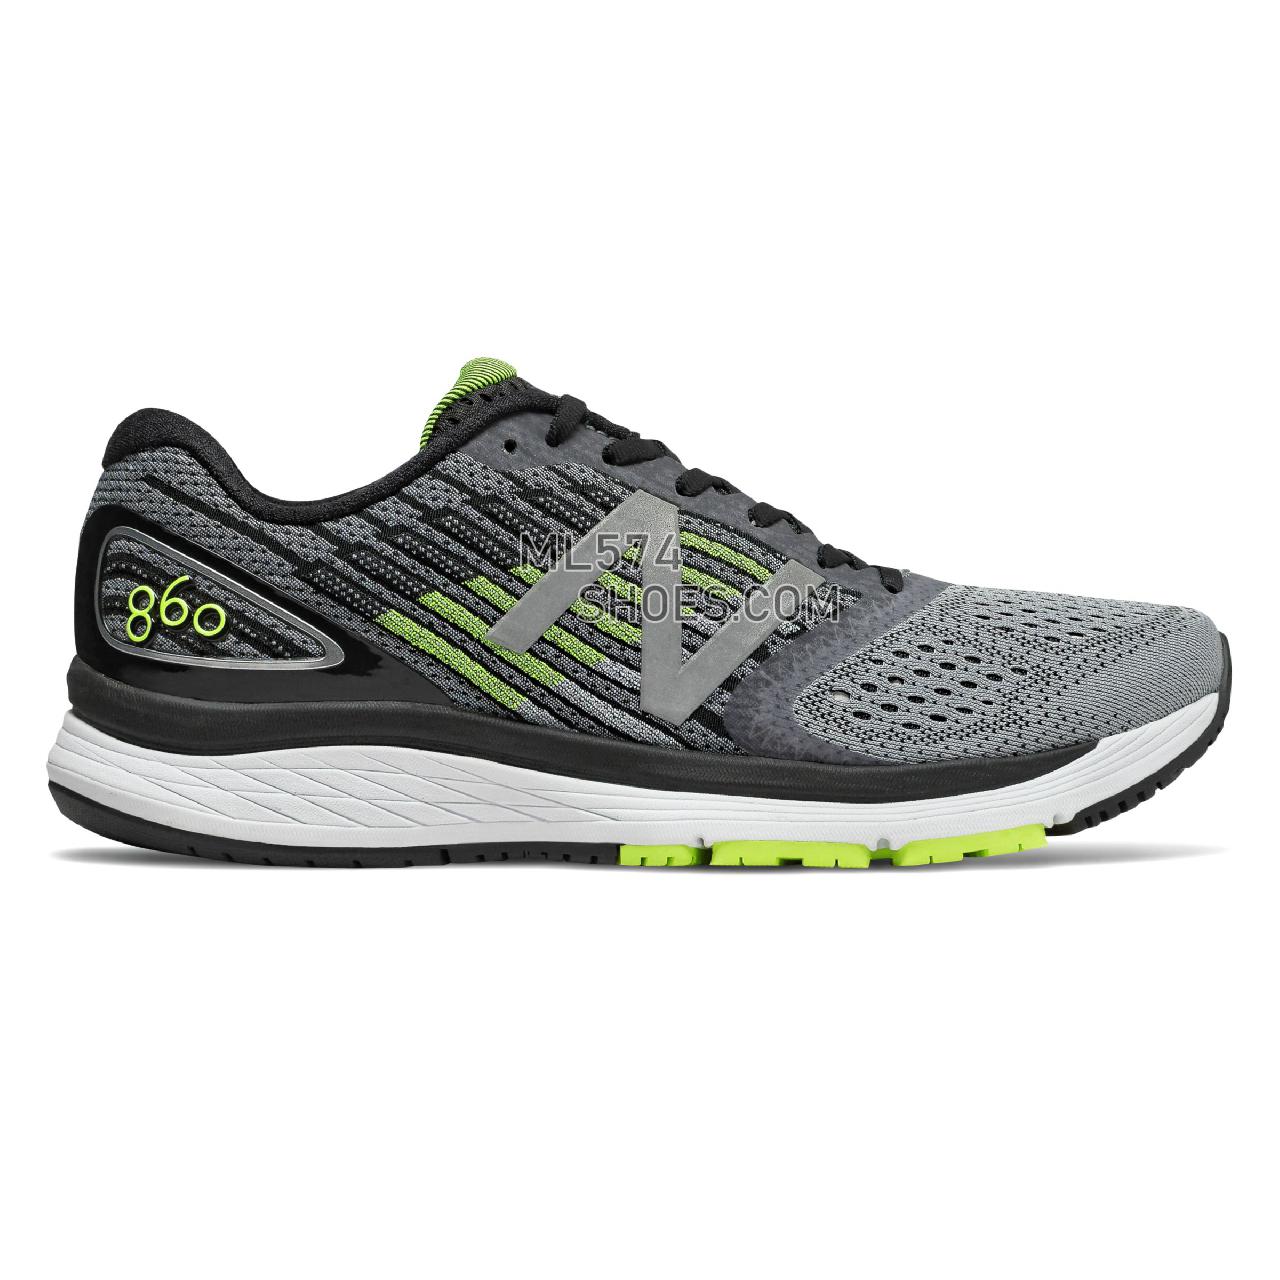 New Balance 860v9 - Men's 860 - Running Steel with Hi-Lite and Black - M860GY9